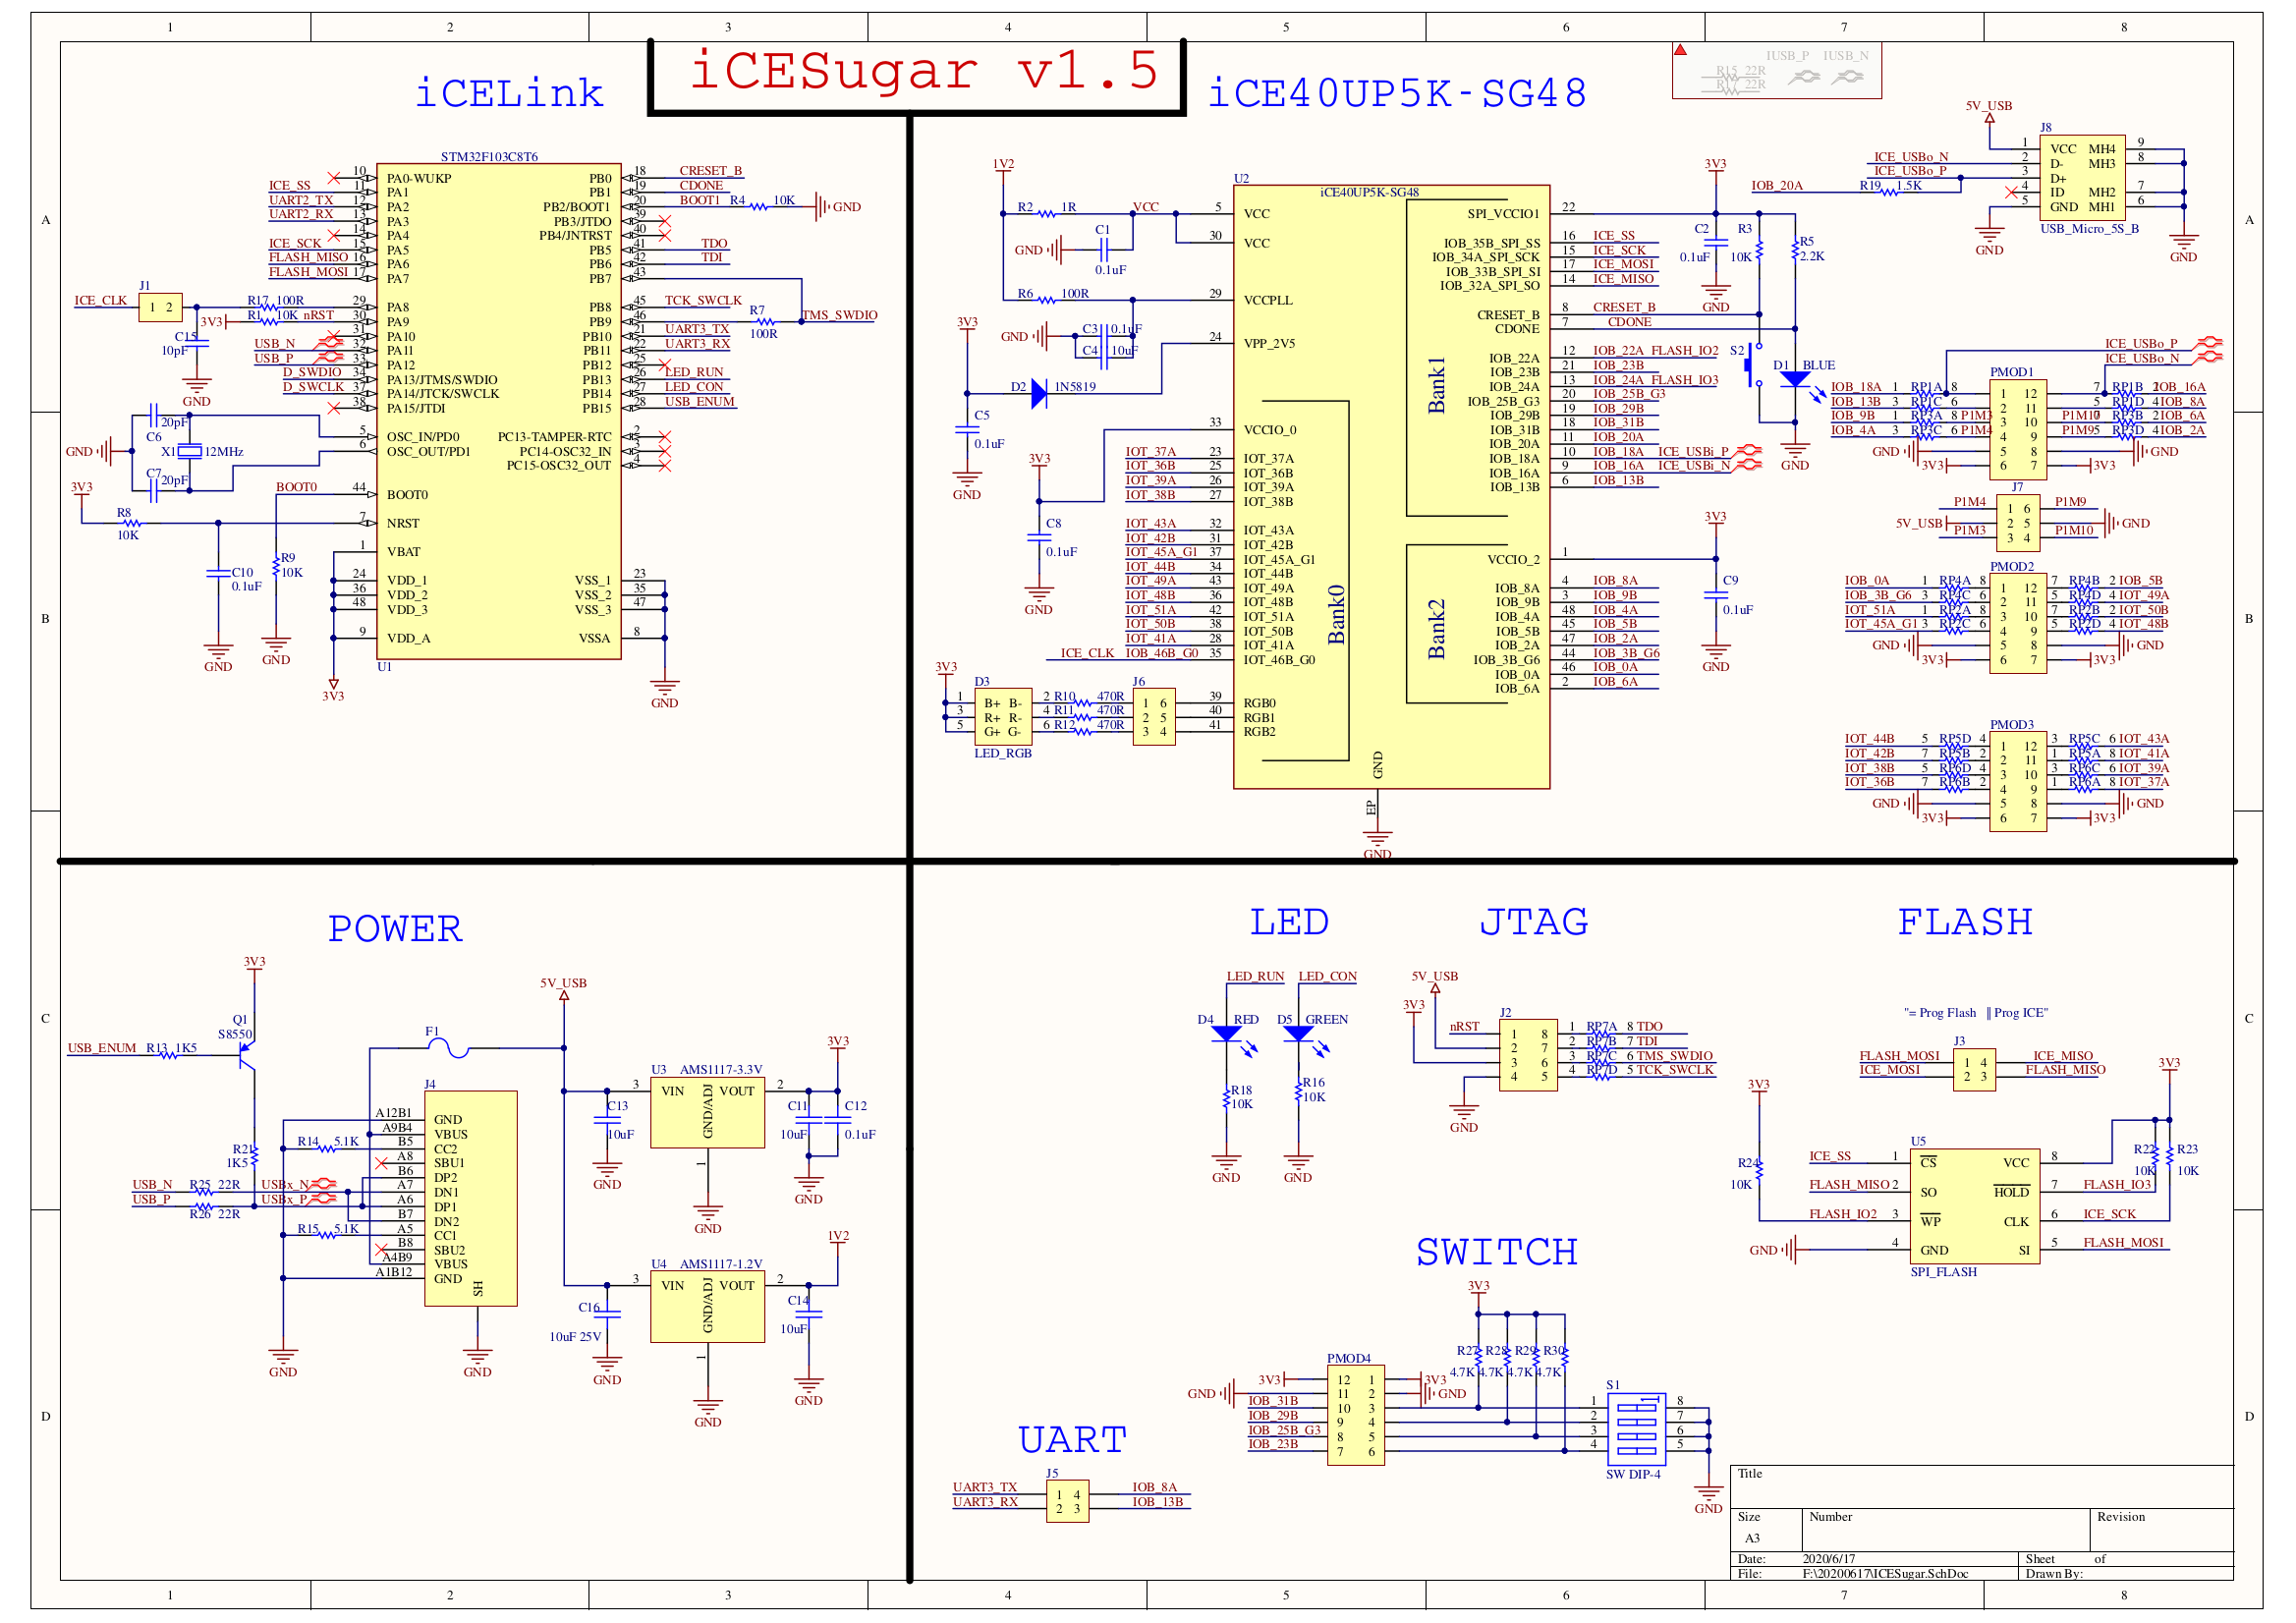 ICESugar-v1.5 schematic.png